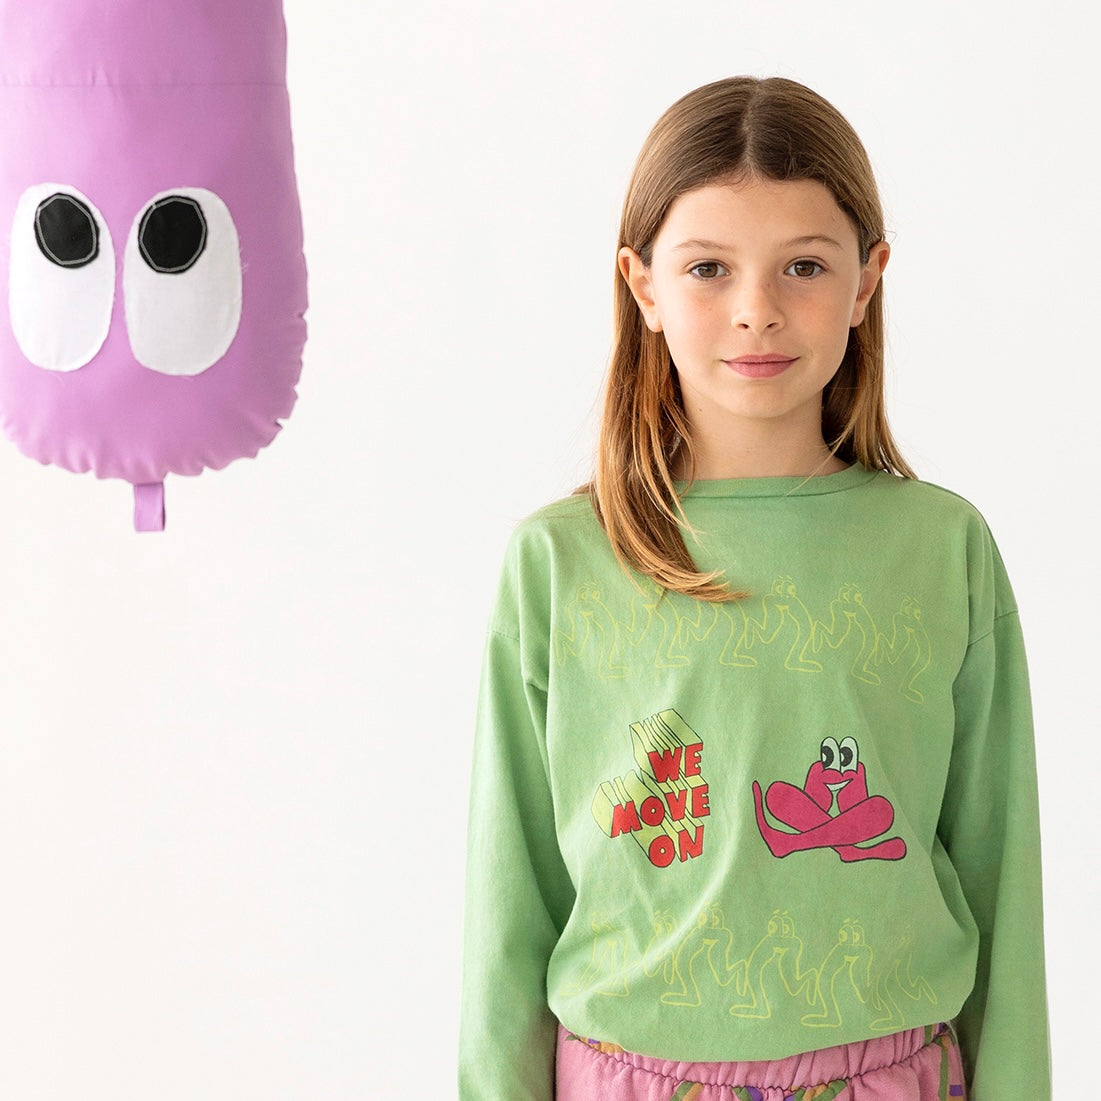 Fresh Dinosaurs - T-shirt long sleeves we move on / 2-3y & 8-9y